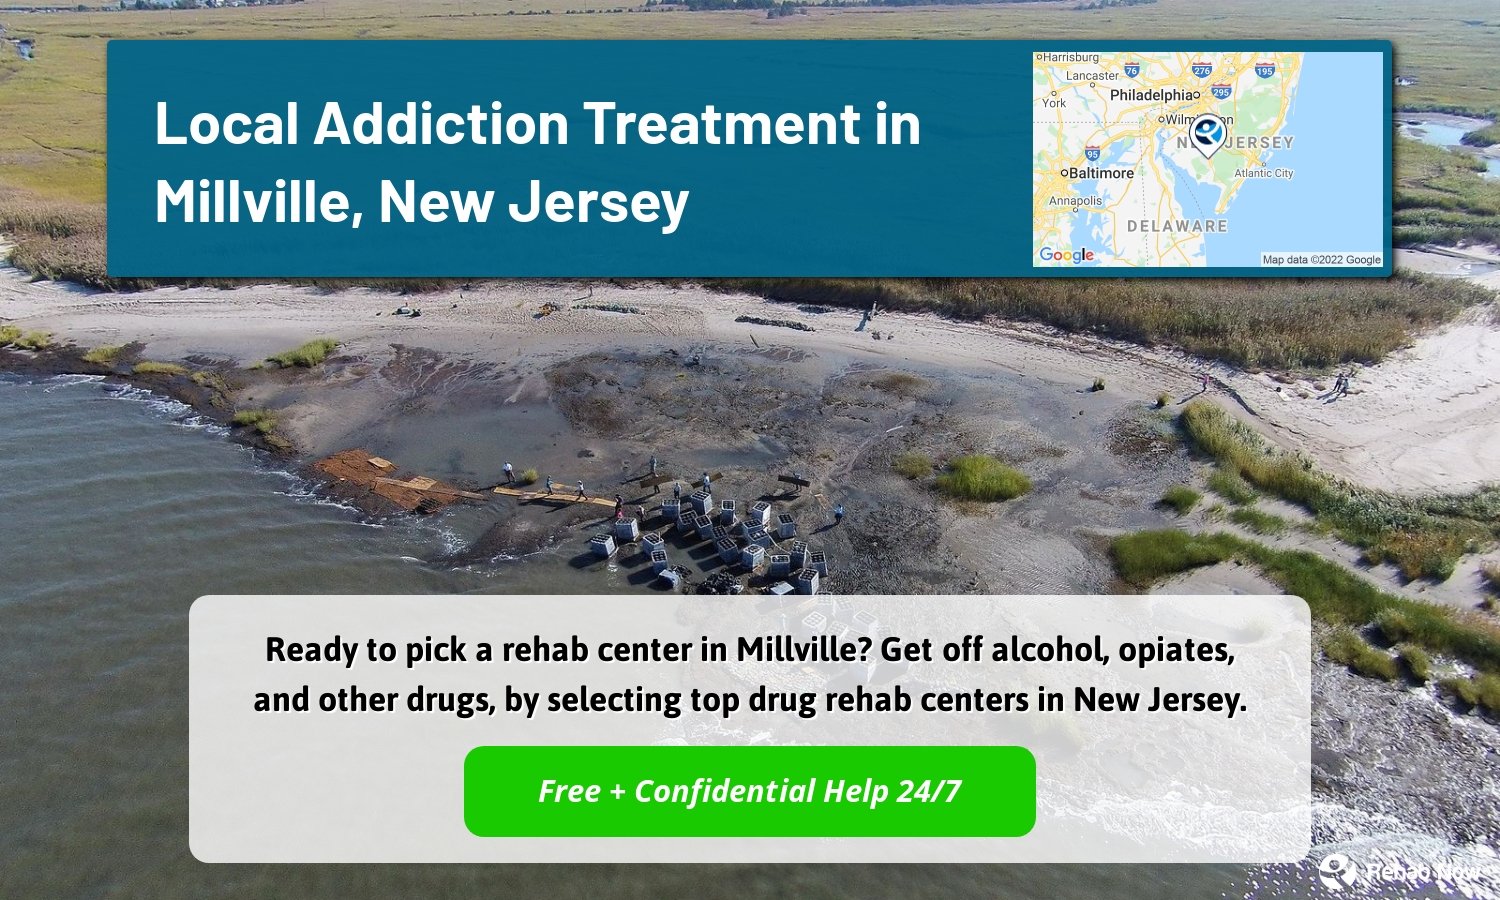 Ready to pick a rehab center in Millville? Get off alcohol, opiates, and other drugs, by selecting top drug rehab centers in New Jersey.